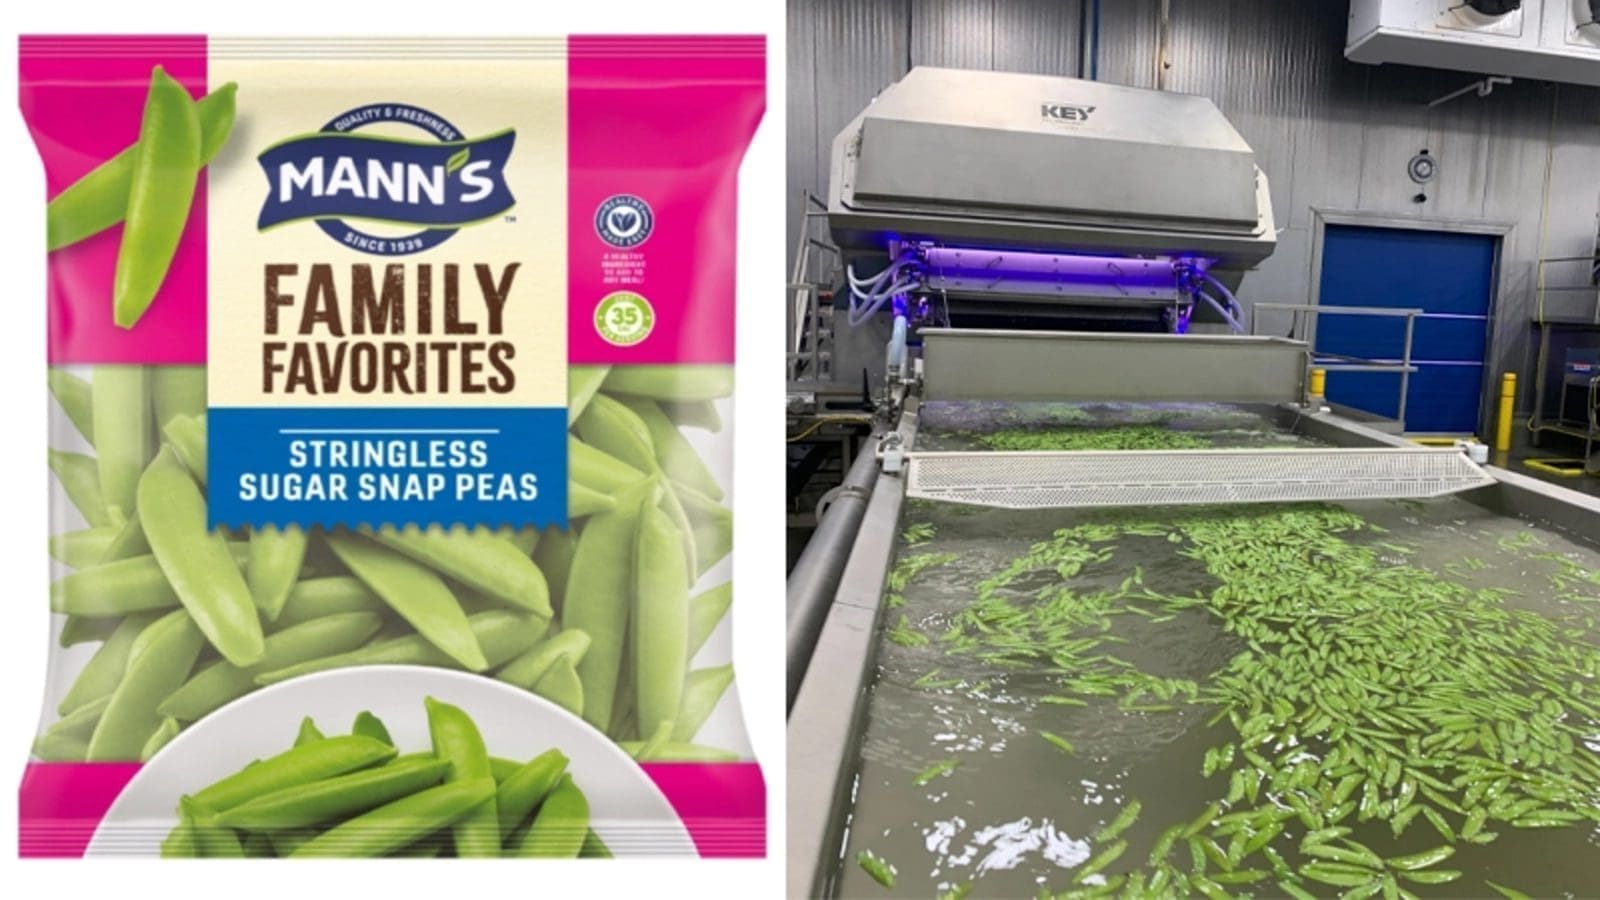 Mann Packing invests US$2.5m in two new optical sorters to increase snap peas output and efficiency